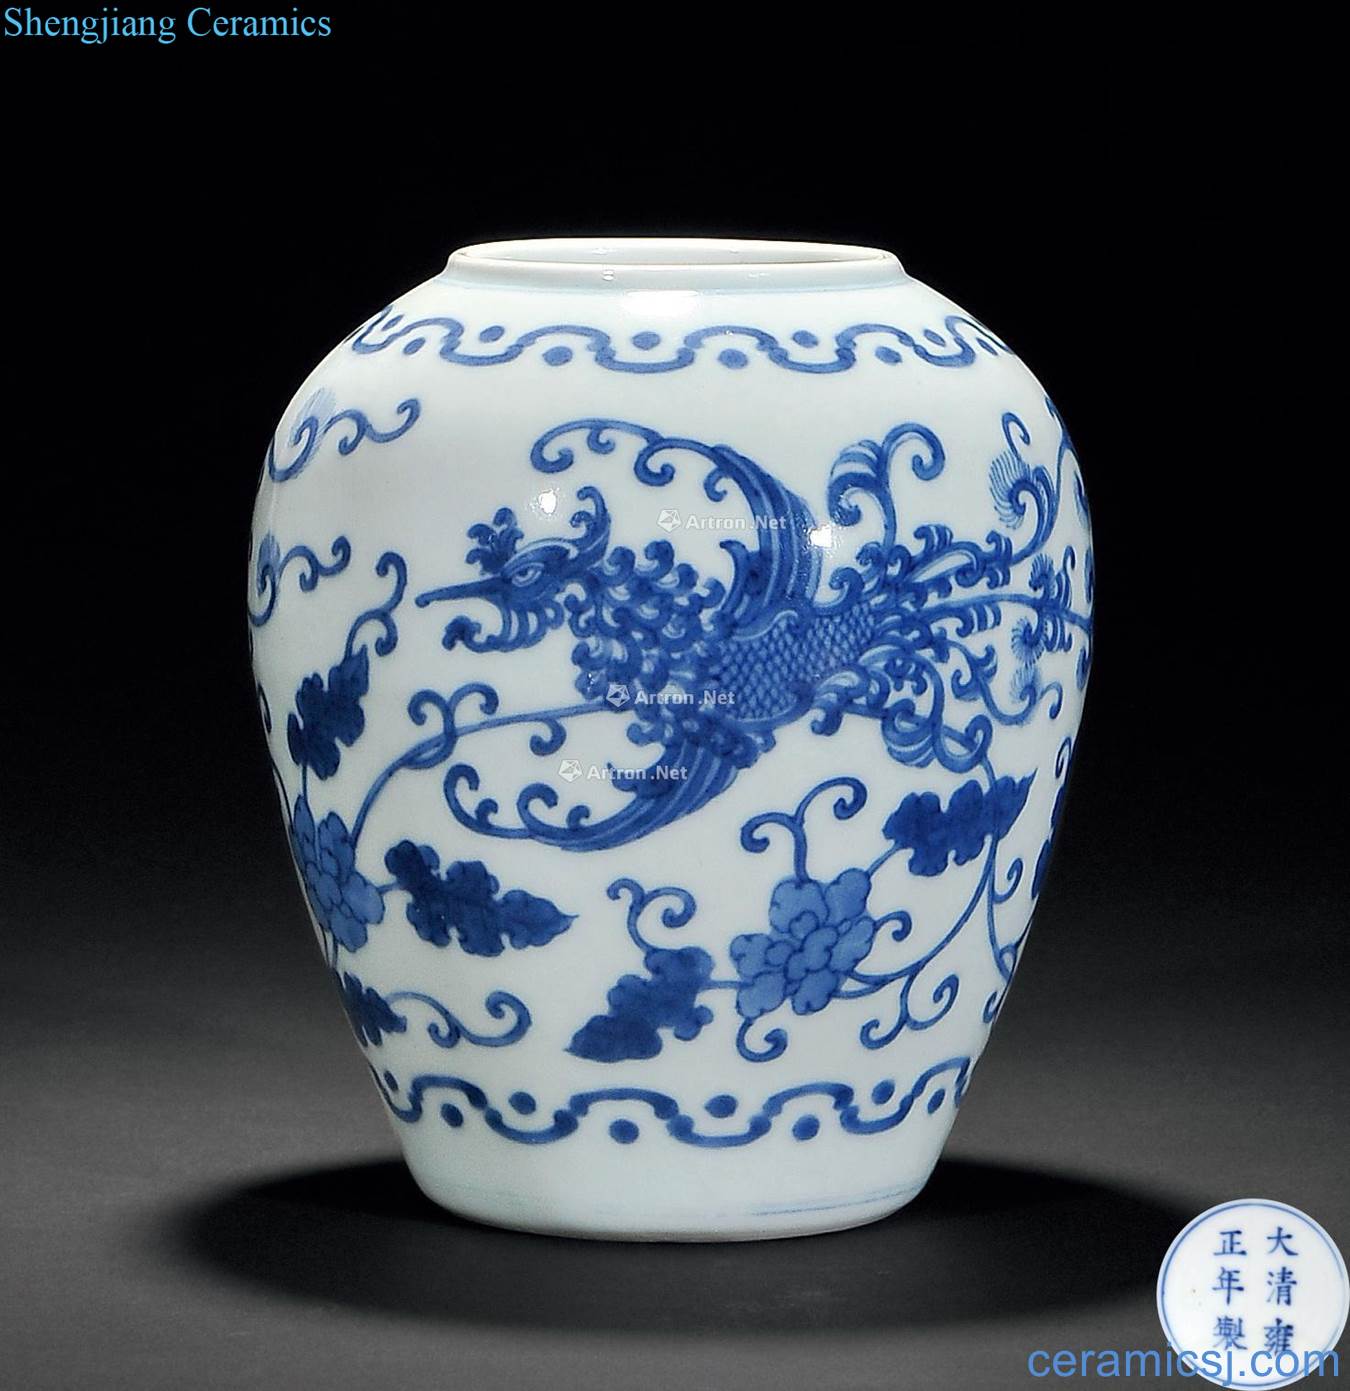 In the qing yongzheng blue real talent phoenix design cans